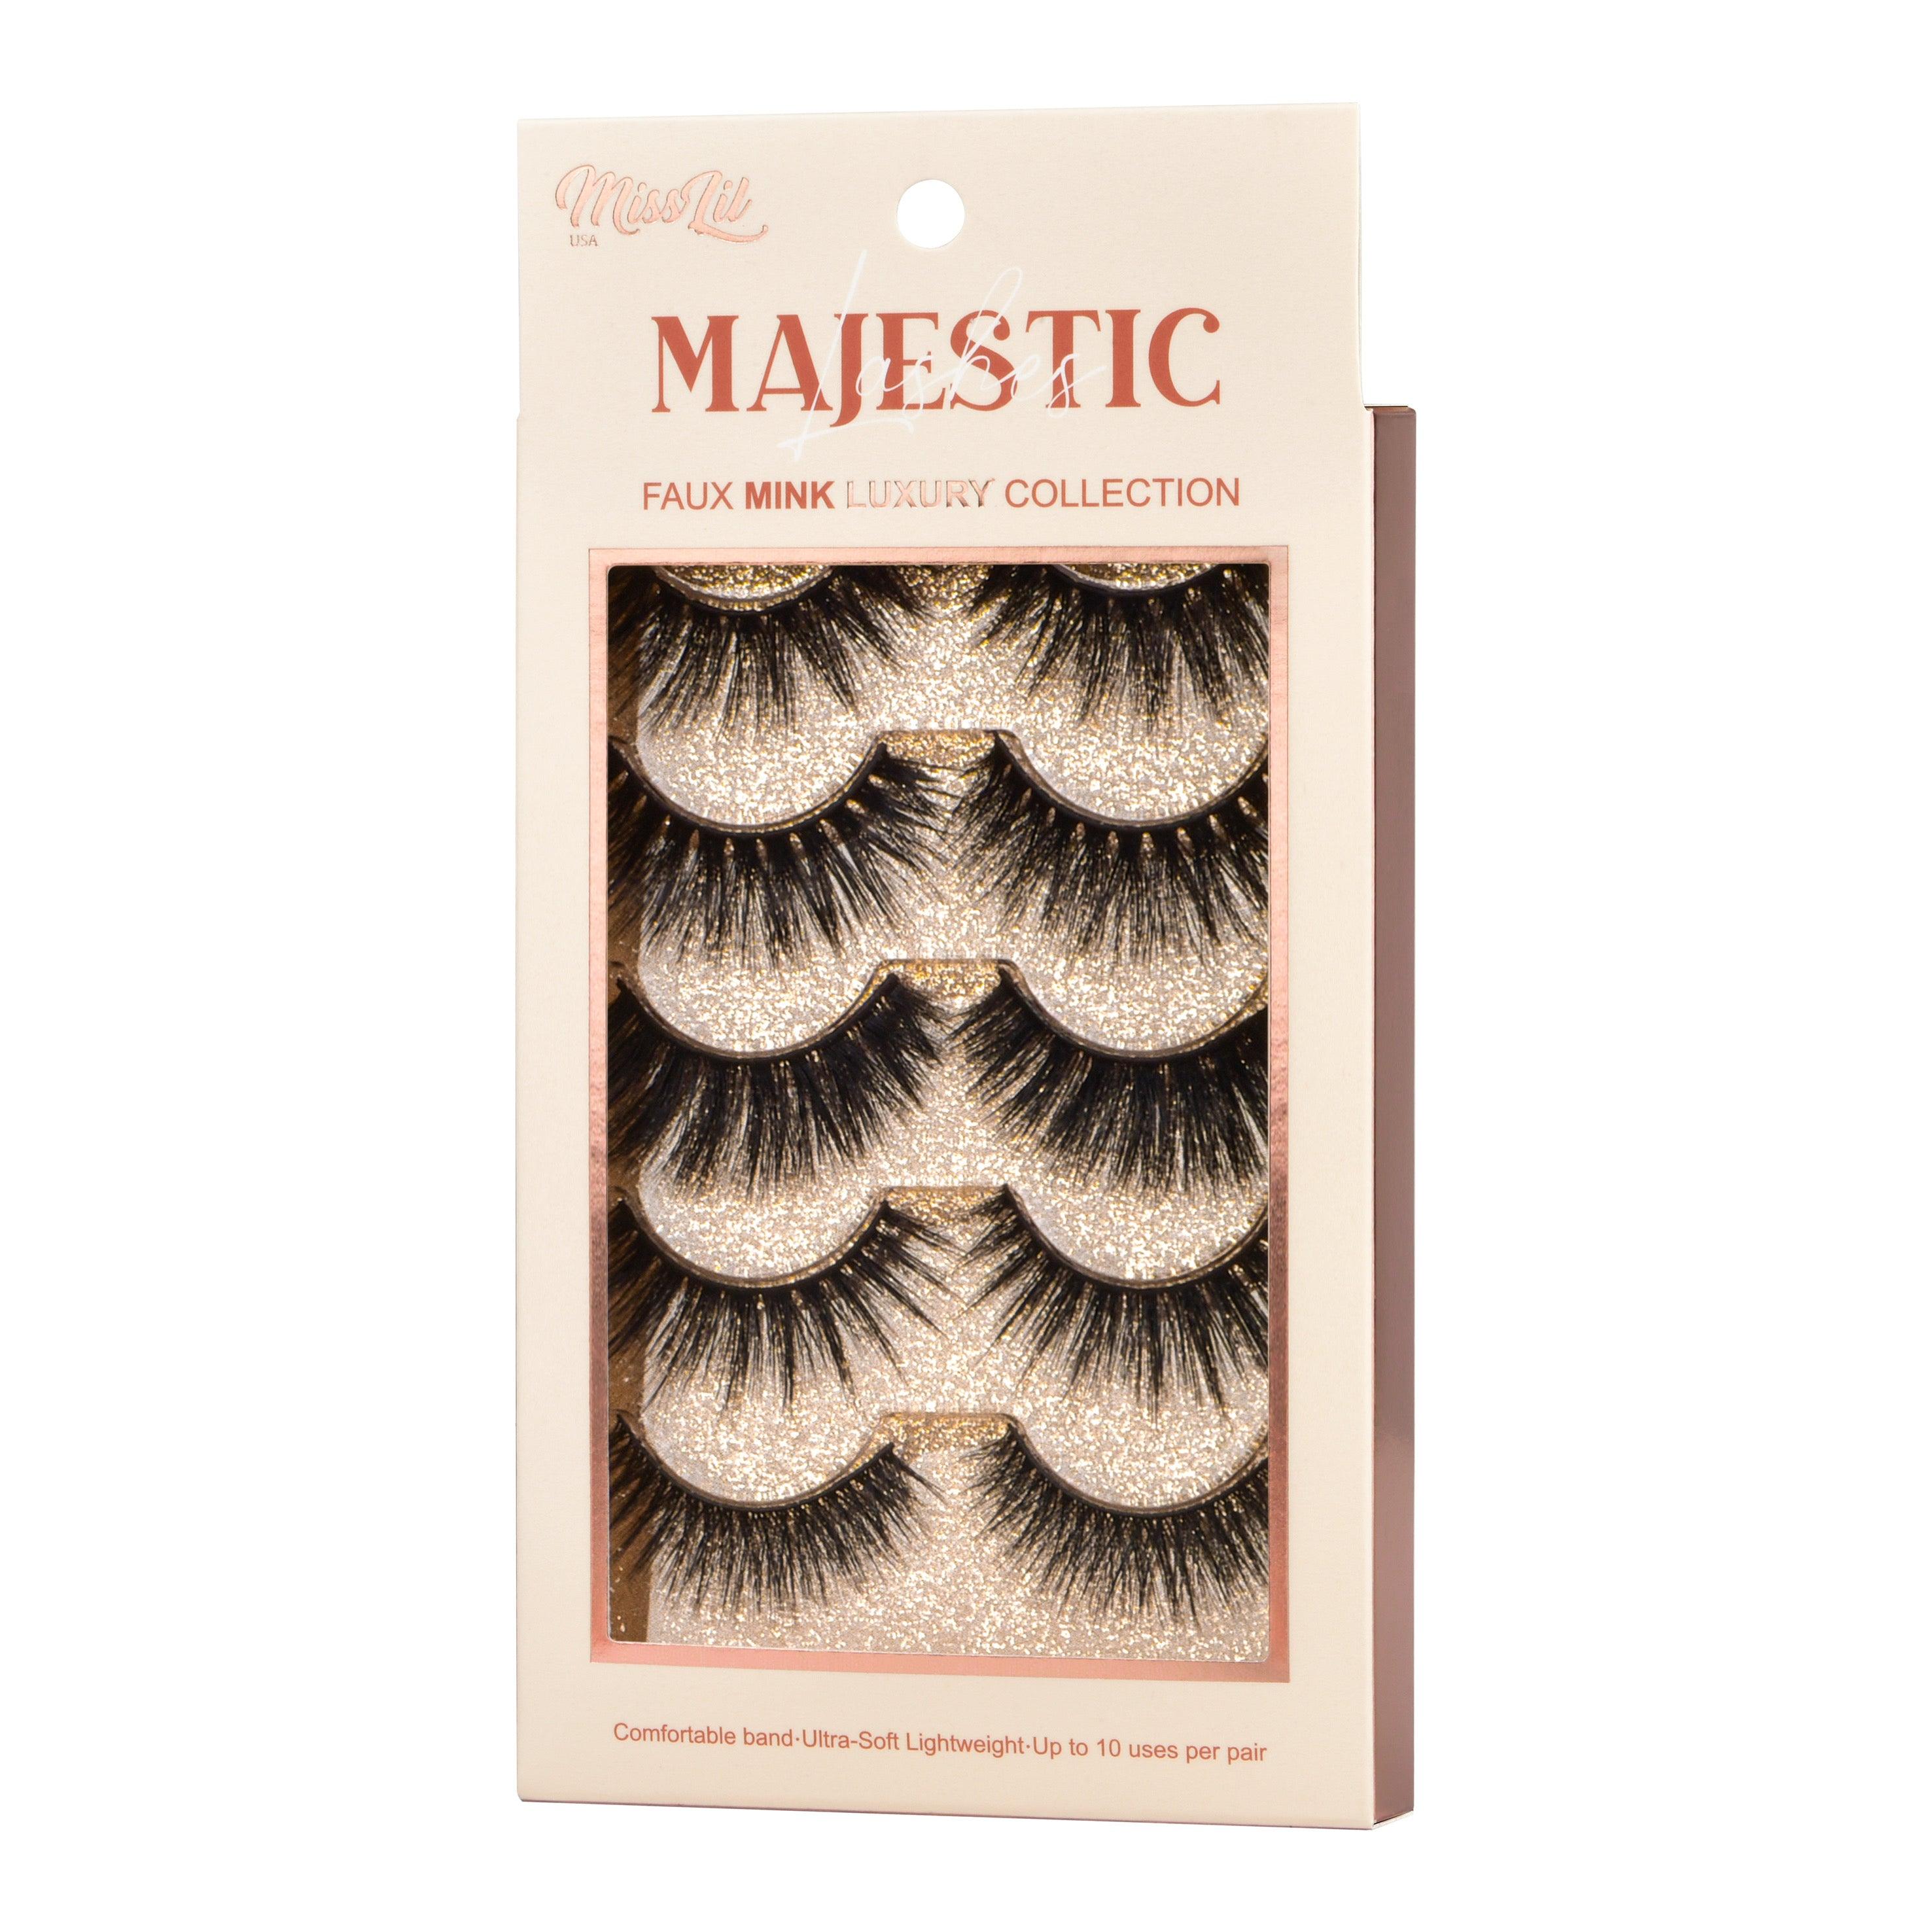 5 Pairs Majestic Collection Lashes #11 - Miss Lil USA